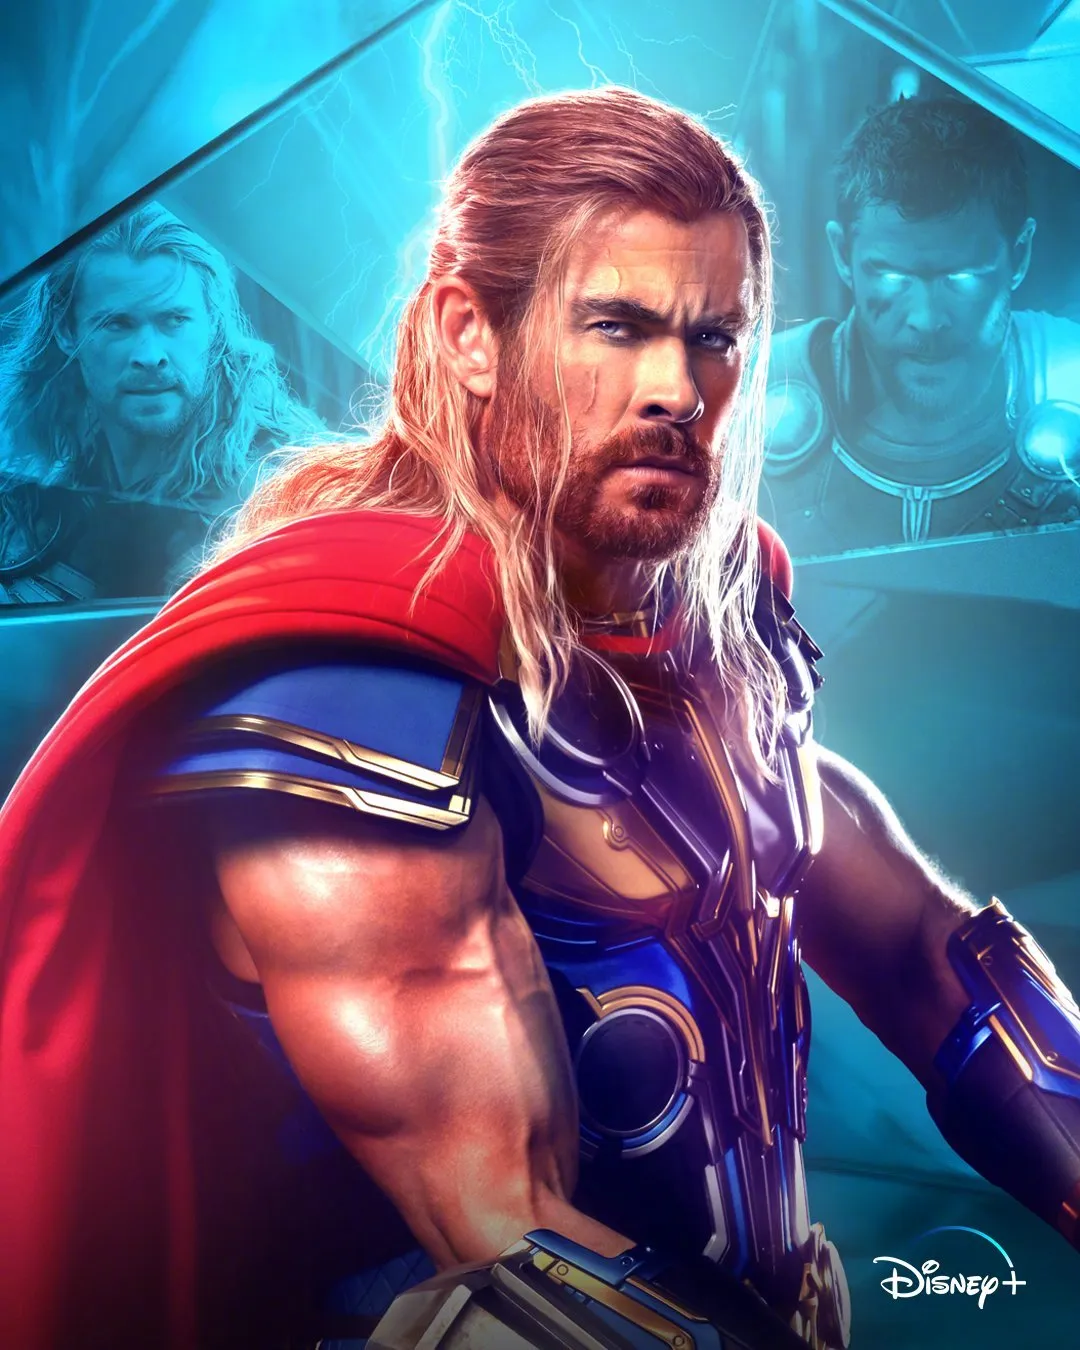 Disney+'s "Thor" series compilation promotional image of the road he traveled | FMV6